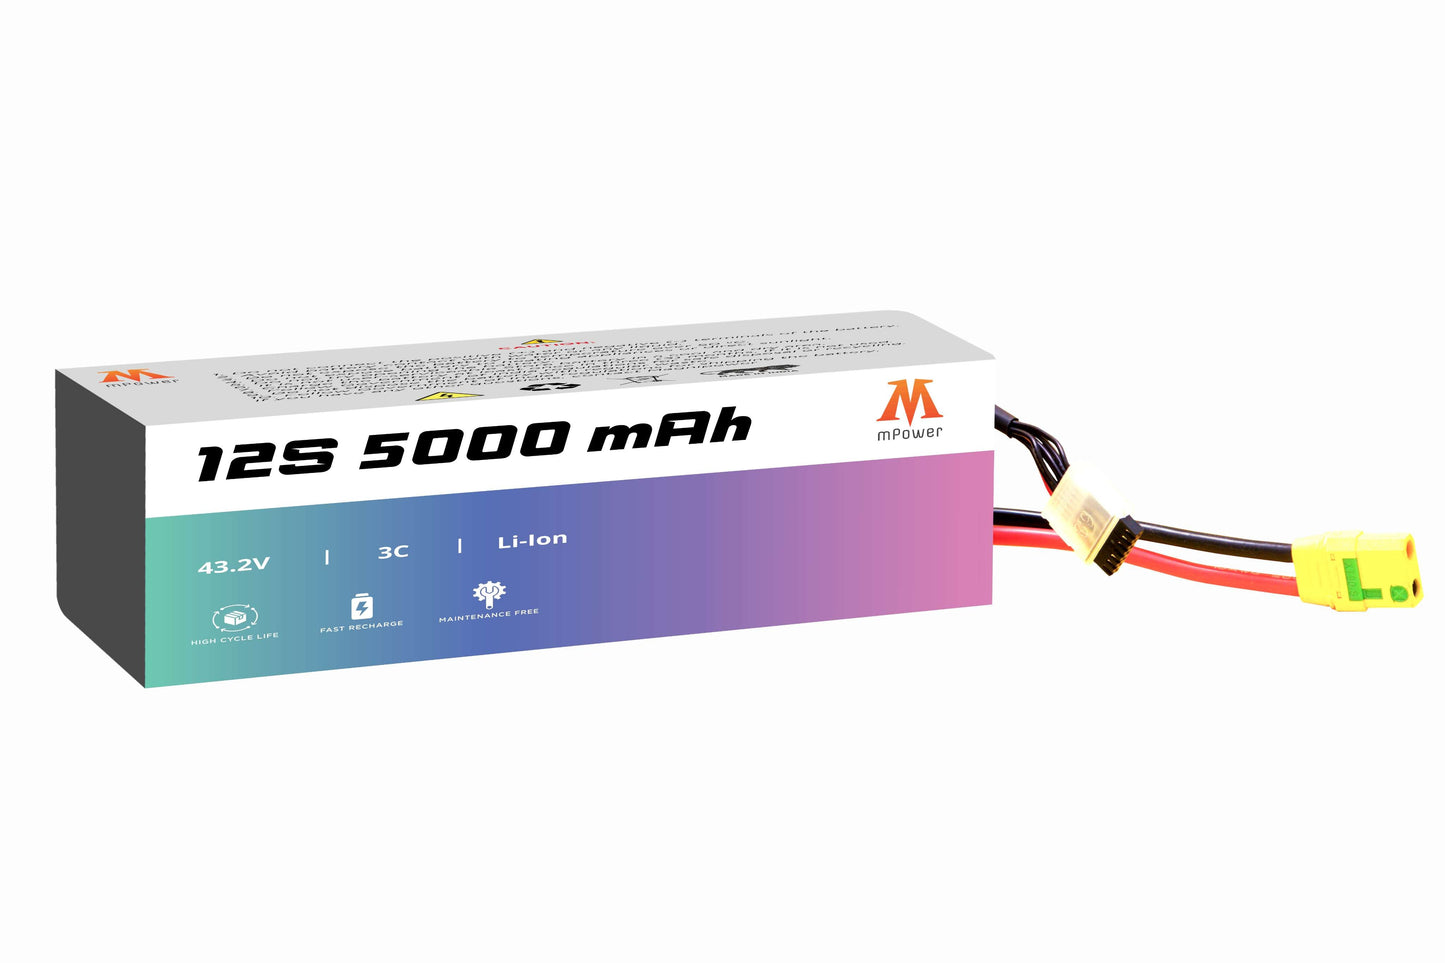 mPower 12S 5000mAh Lithium-Ion Battery for Survey Drones